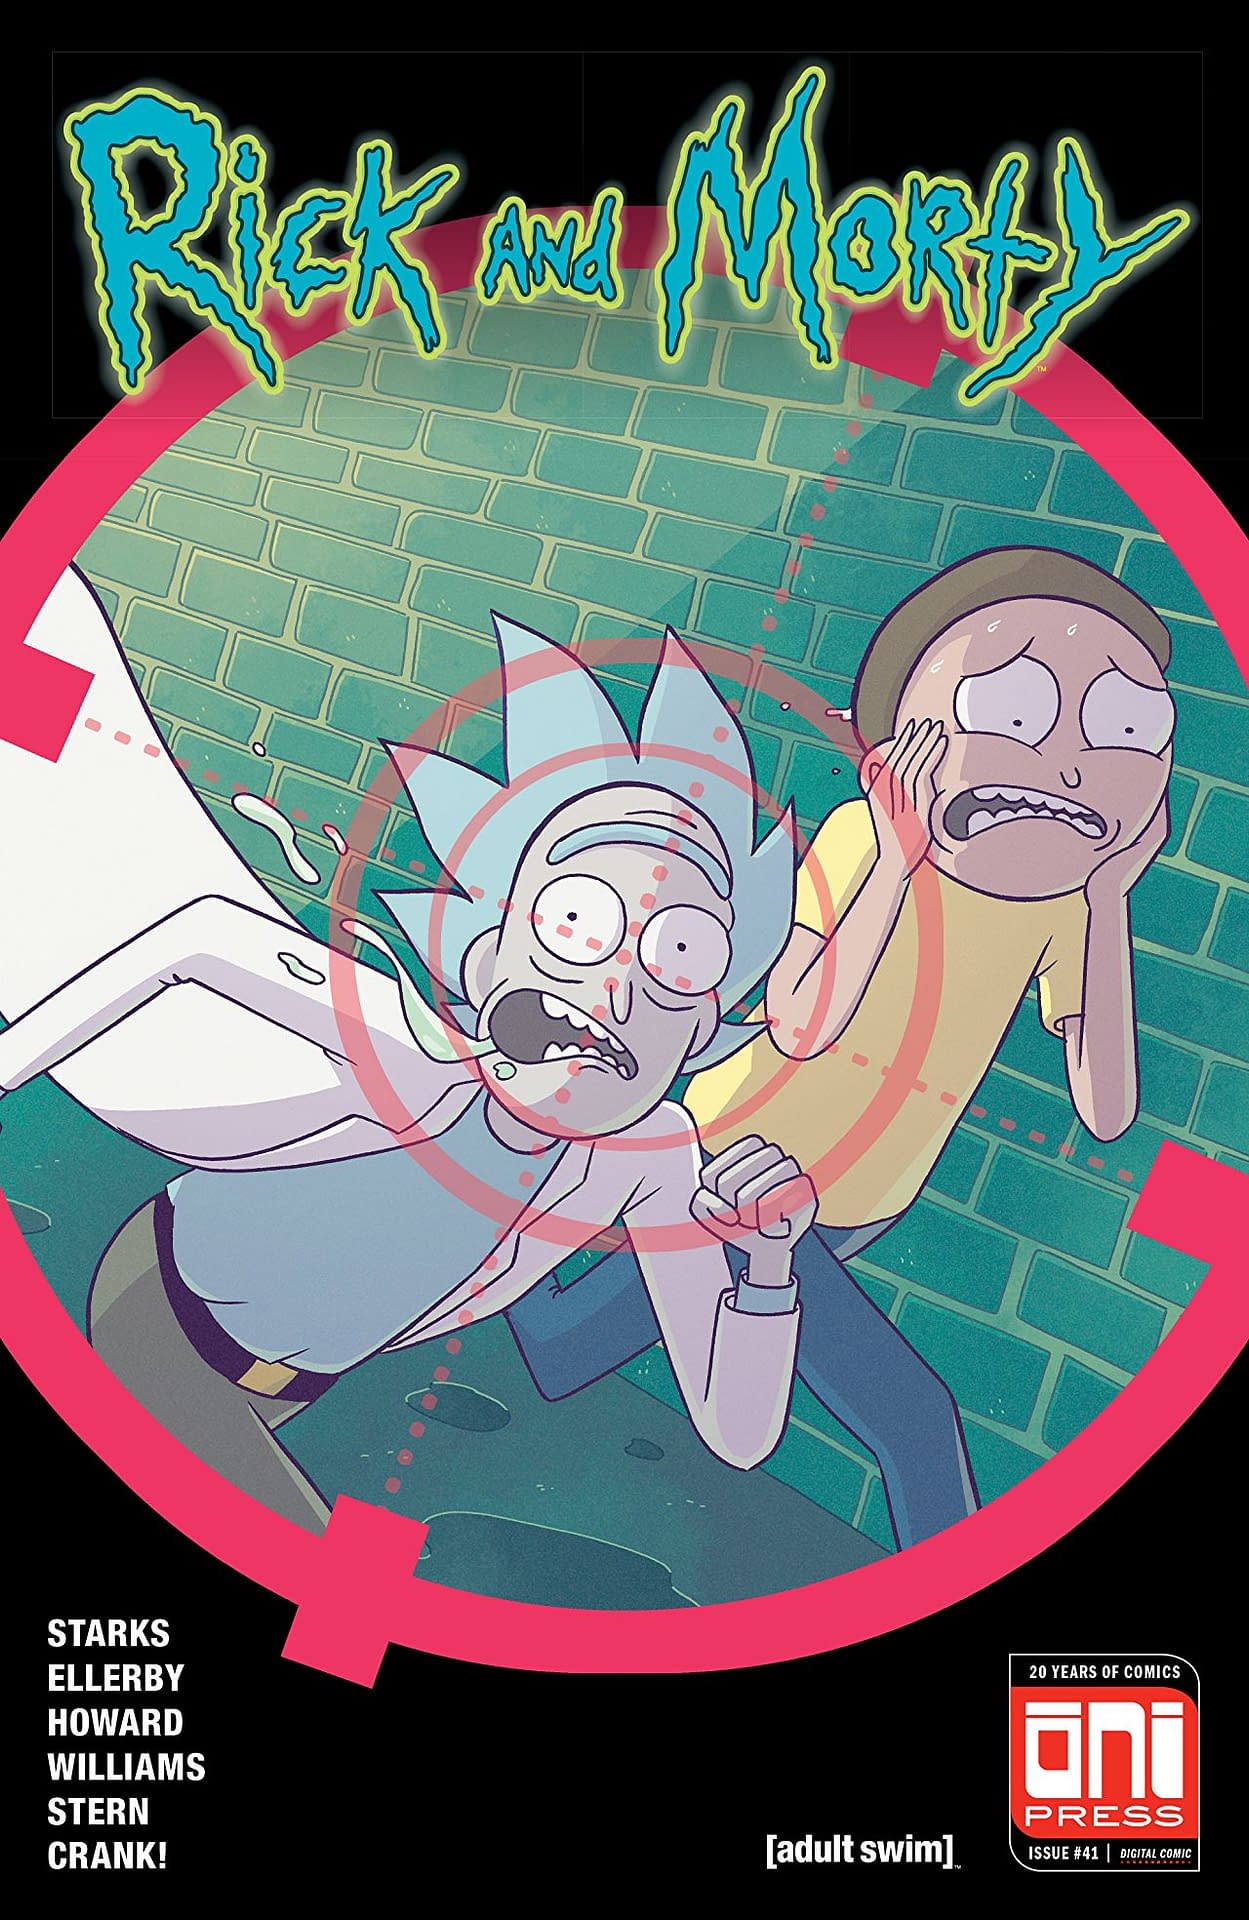 Rick and Morty #41 Review: Enter the Rick Revenge Squad